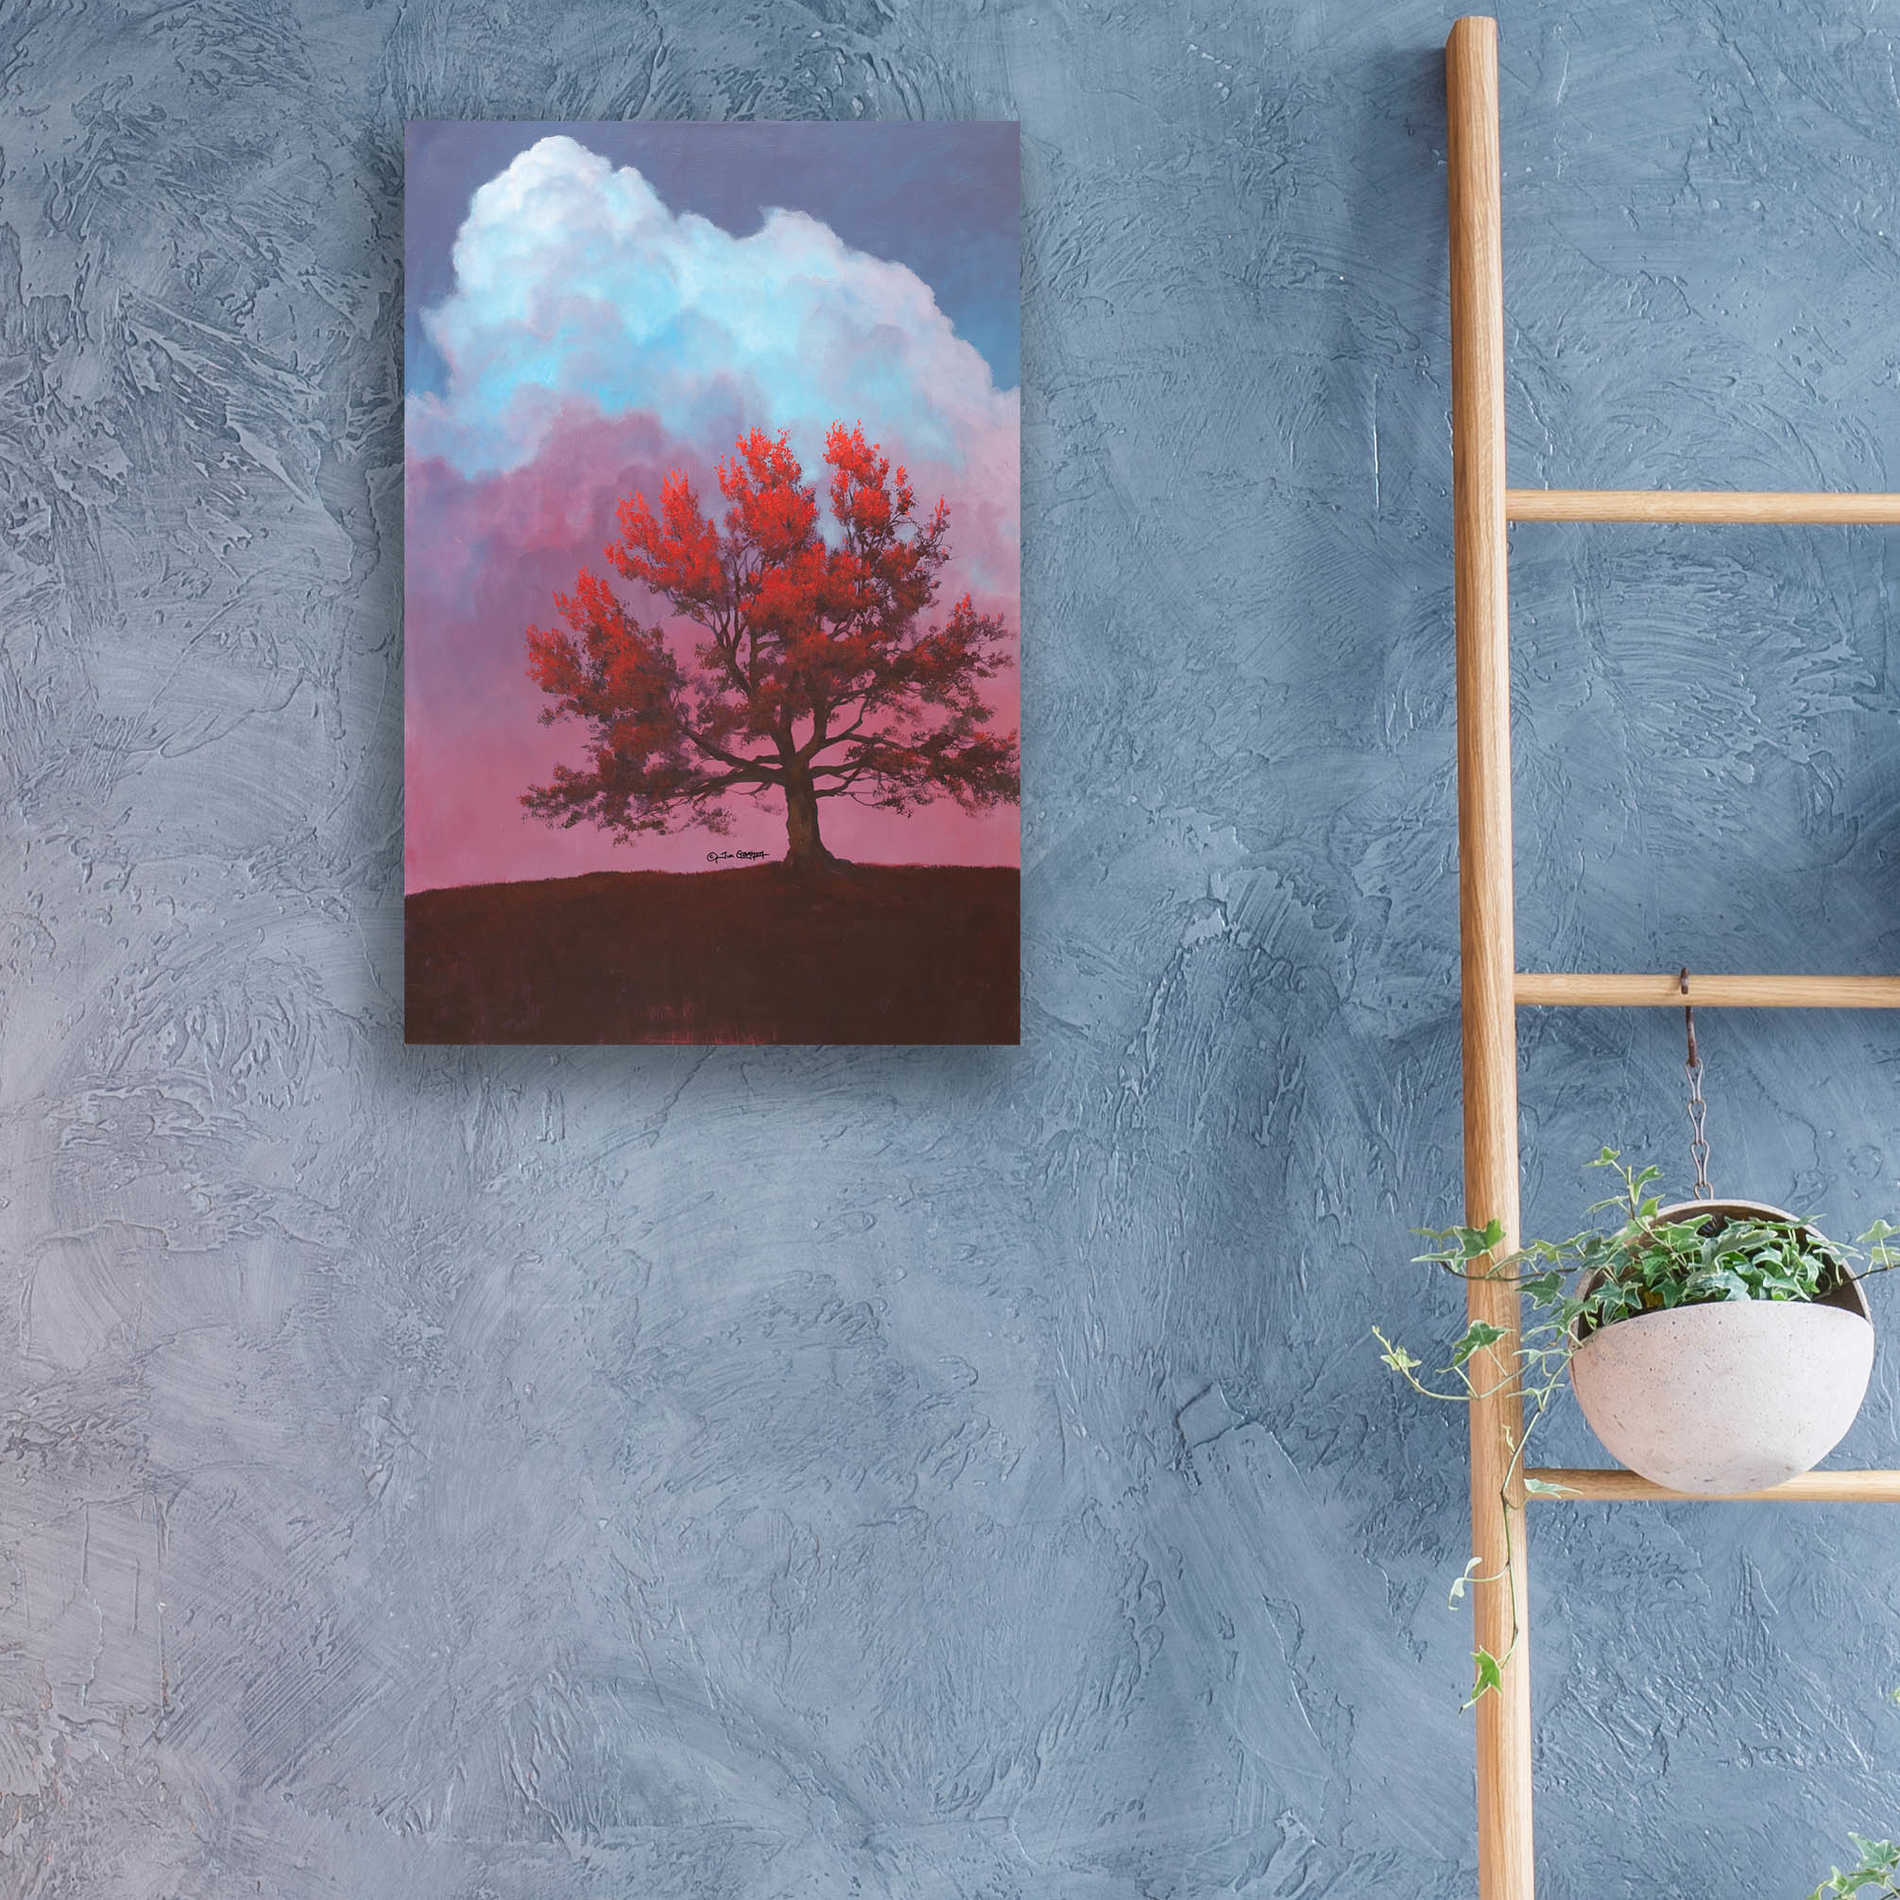 Art 'Red Tree' by Tim Gagnon, Glass Wall – EpicArt.com